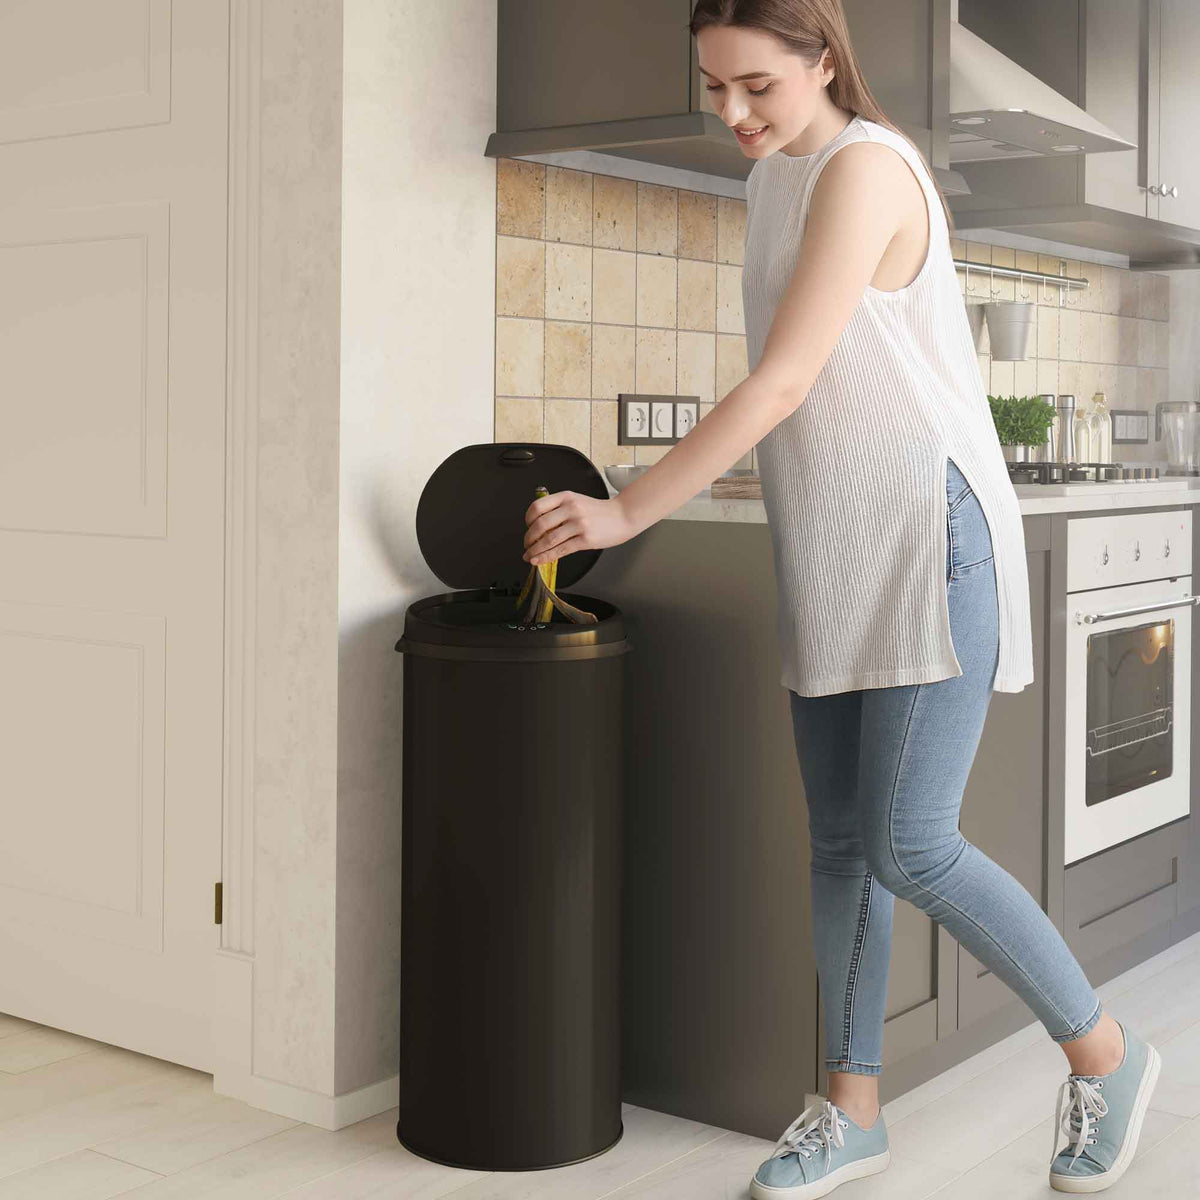 eModernDecor 13-Gallons Black Stainless Steel Touchless Kitchen Trash Can  with Lid Outdoor